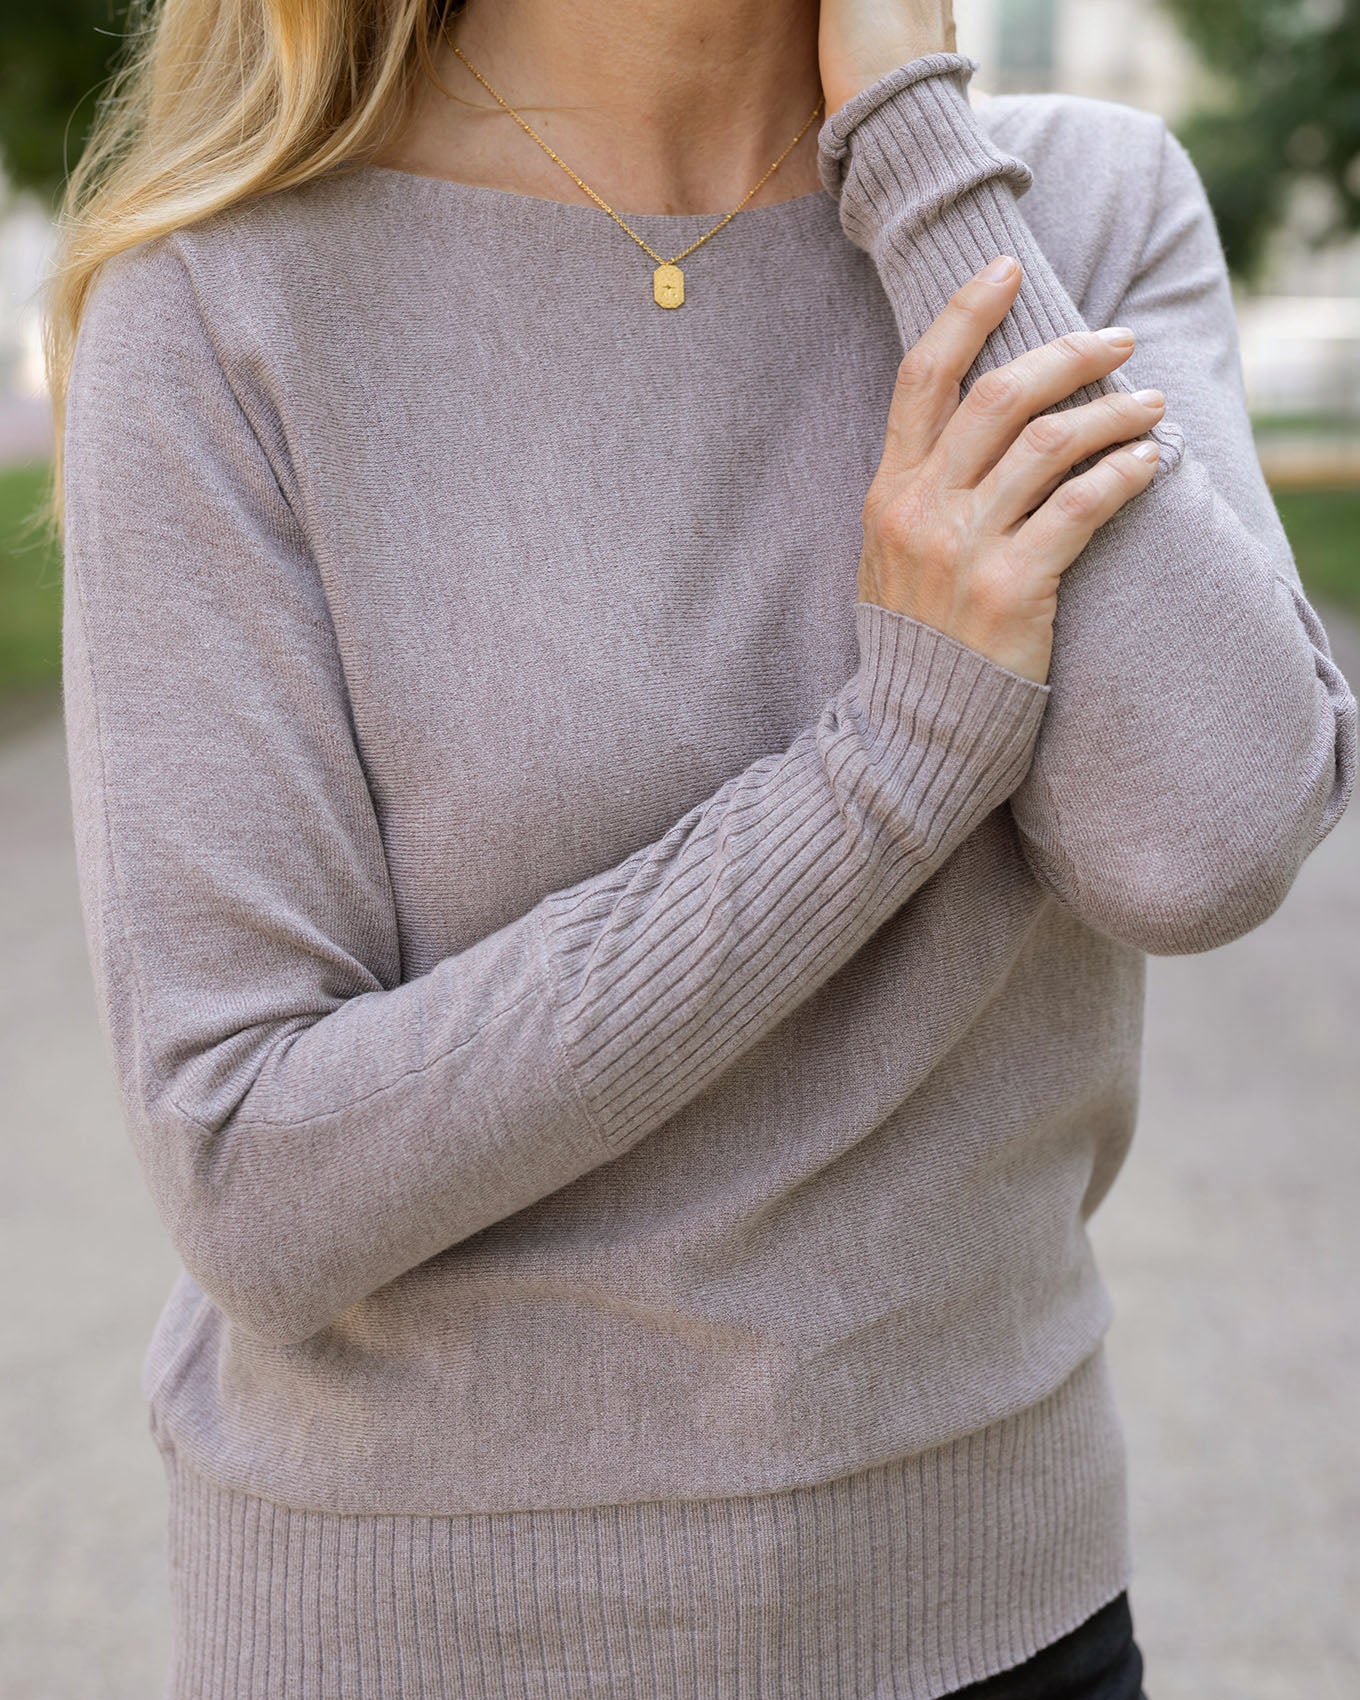 Classic & Cozy Almondine Sweater Top - Grace and Lace